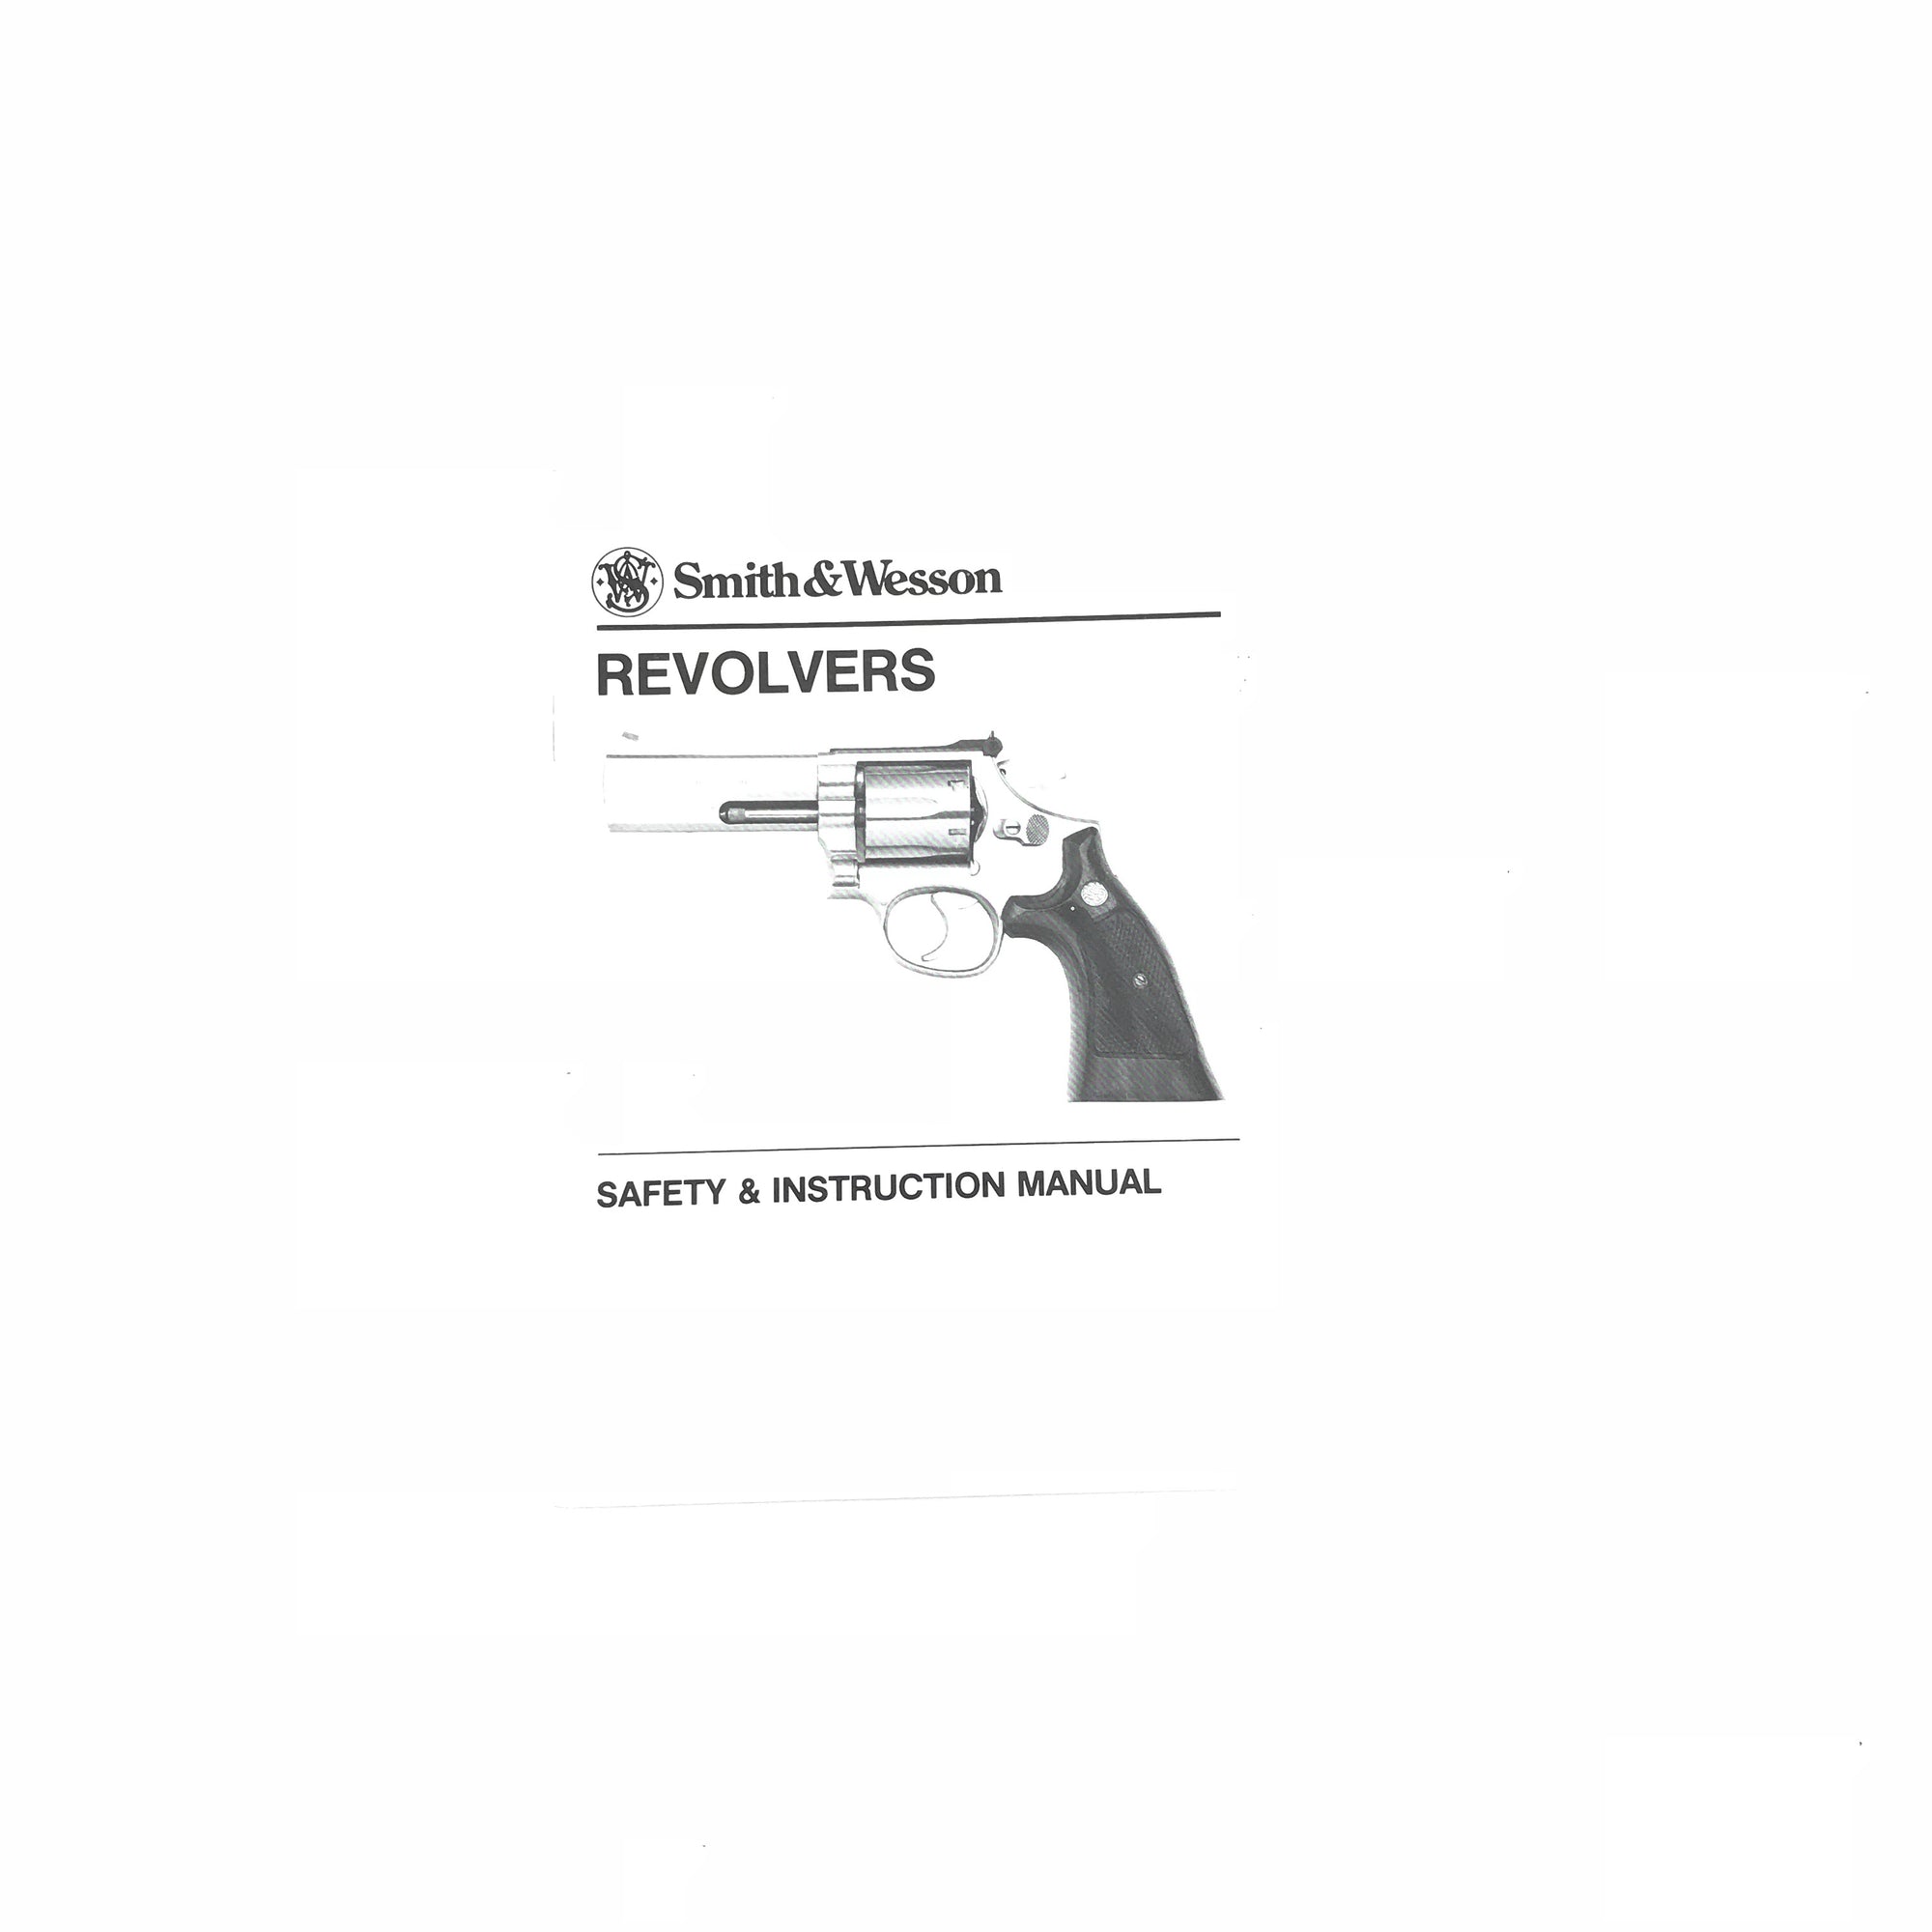 Smith & Wesson Revolvers - Safety & Instruction Manual